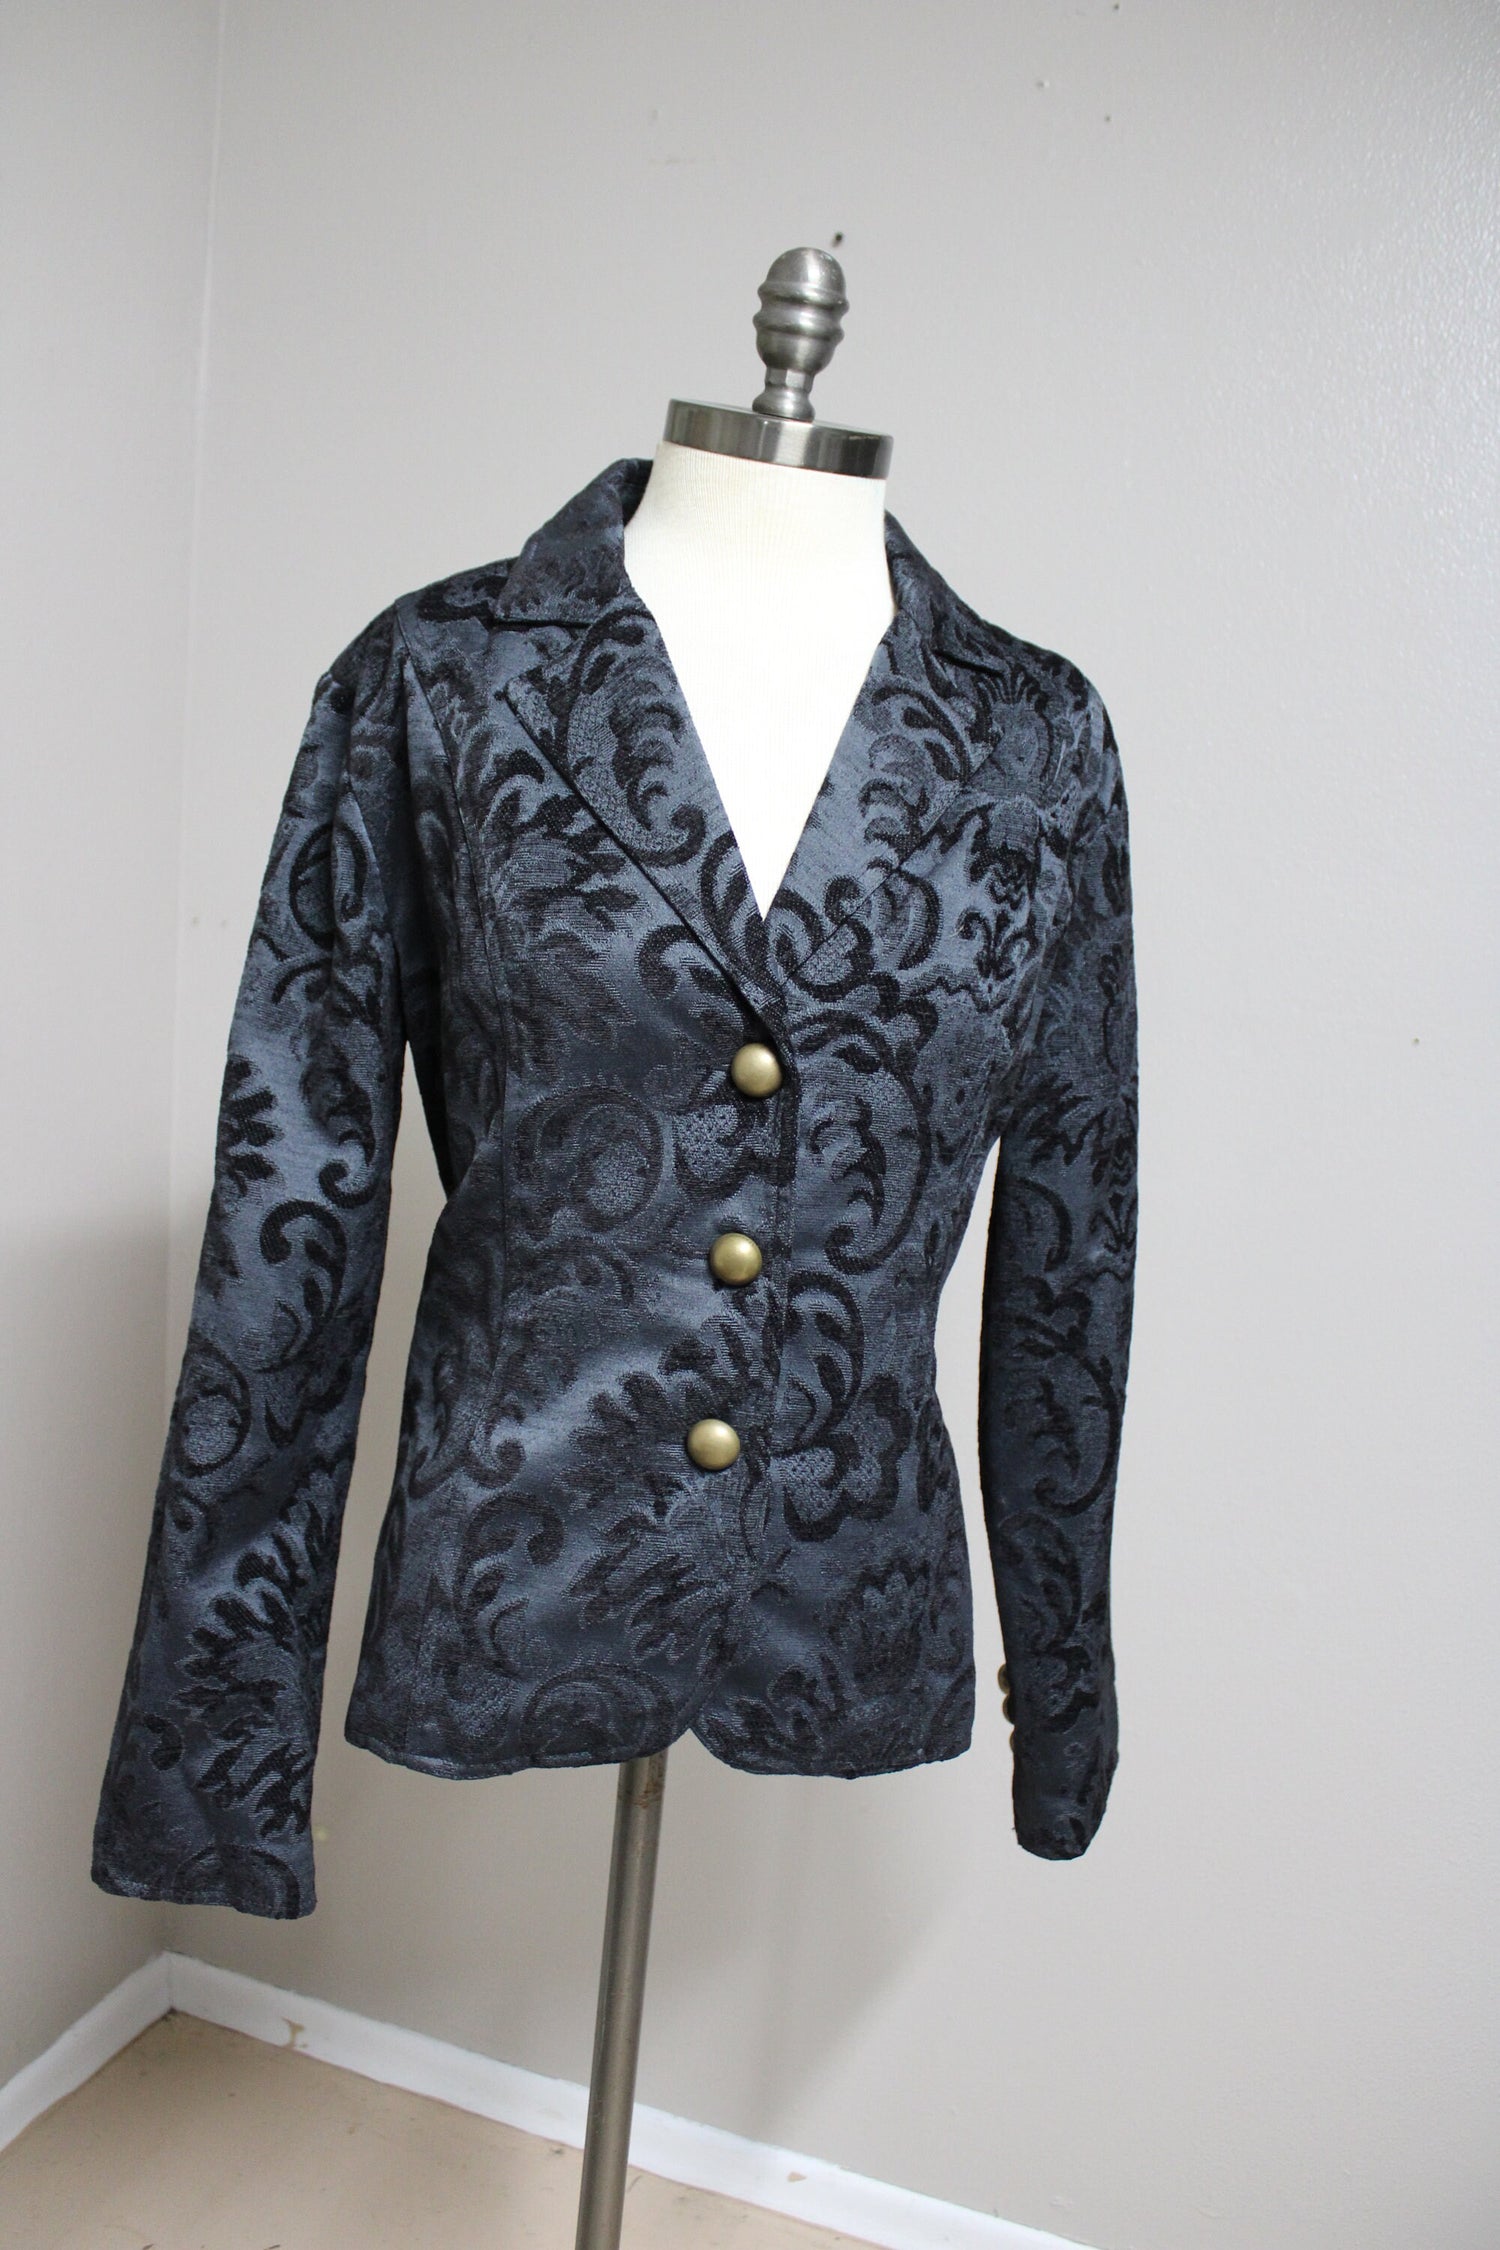 Distressed Gothic Vampire Pirate Brocade Jacket Size L /XL Lord and Lady Towers